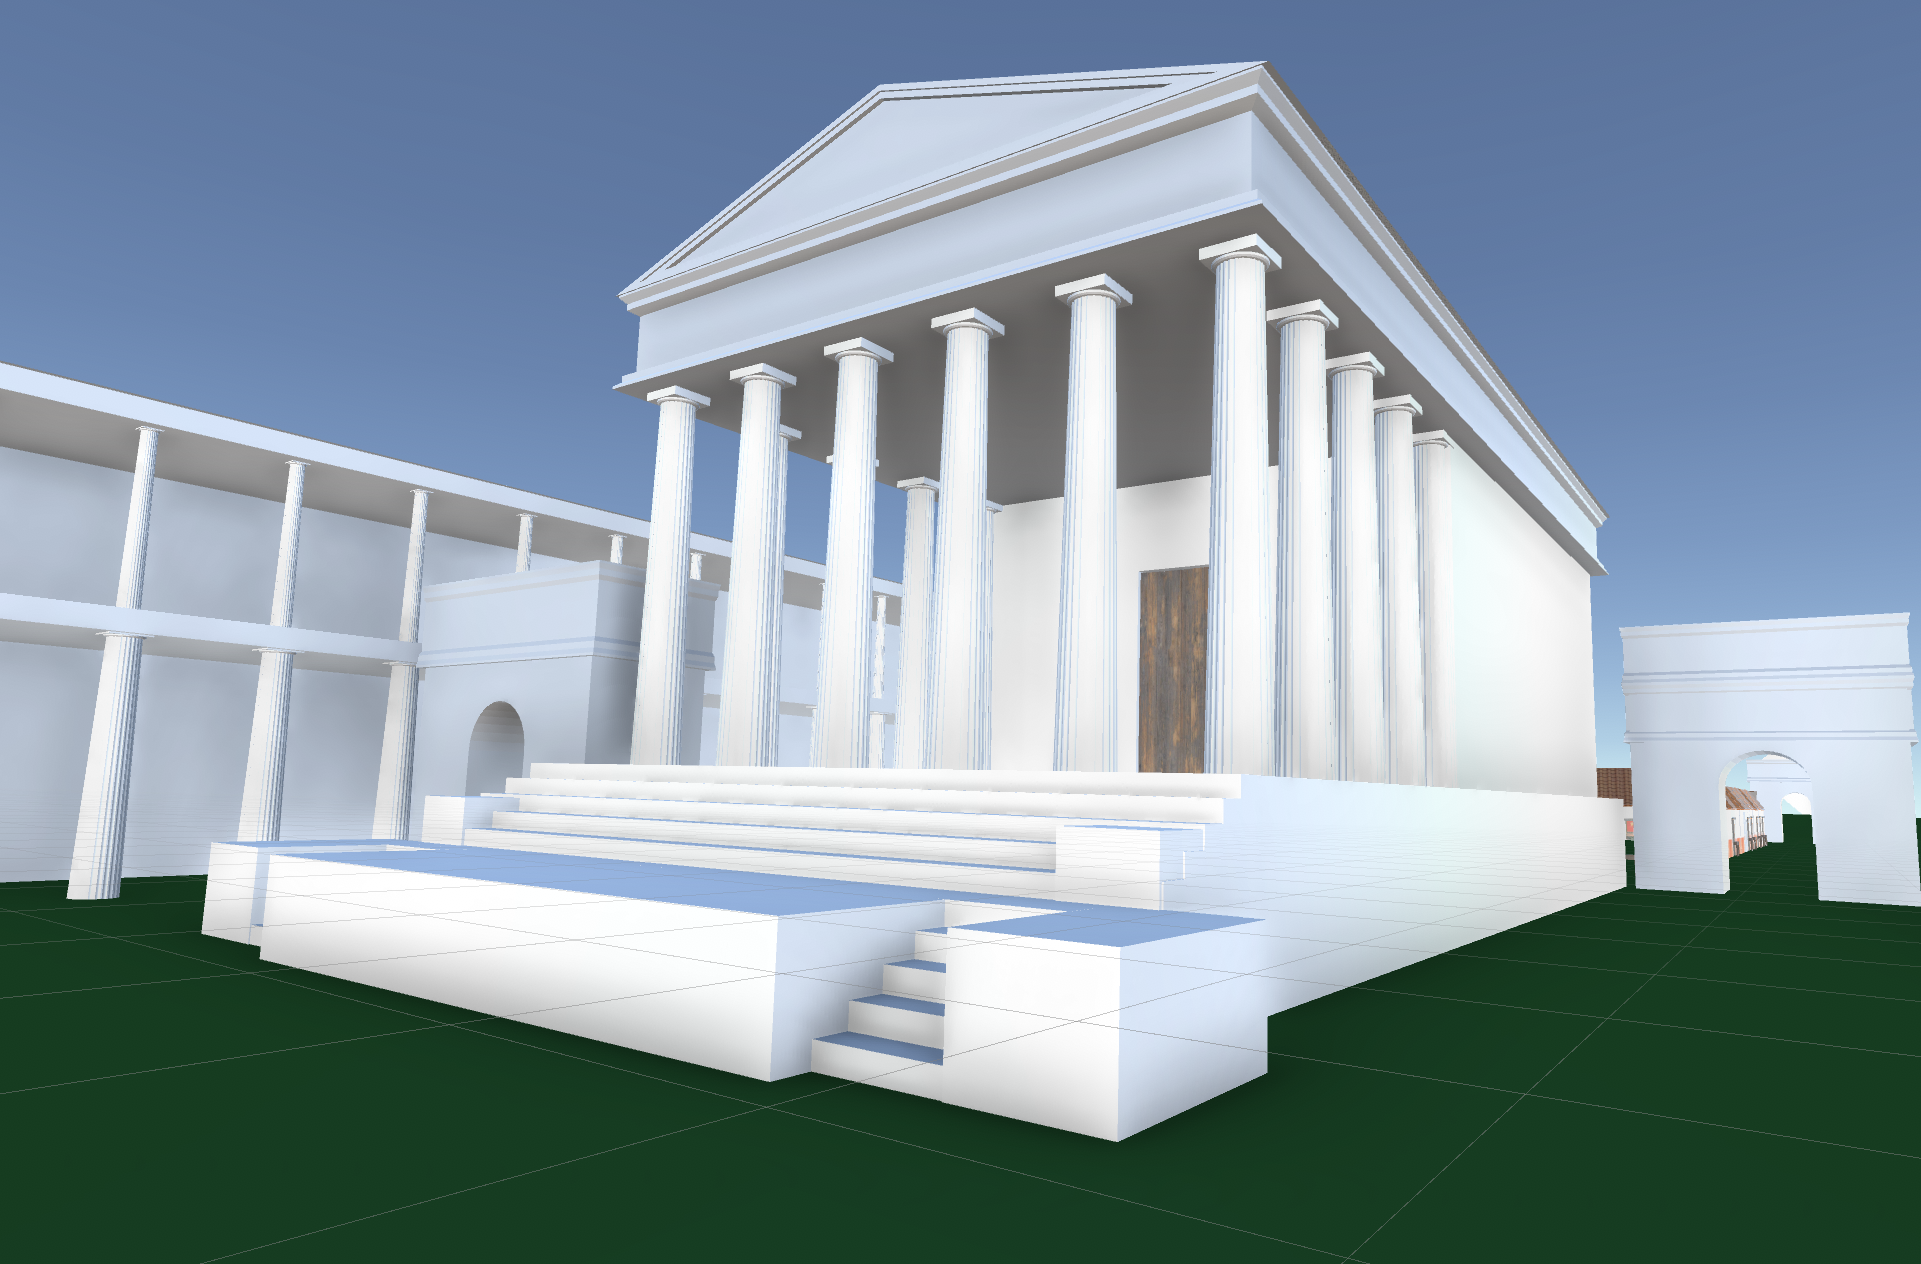 Game view screenshot showing the Temple of Jupiter and two nearby triumphal arches